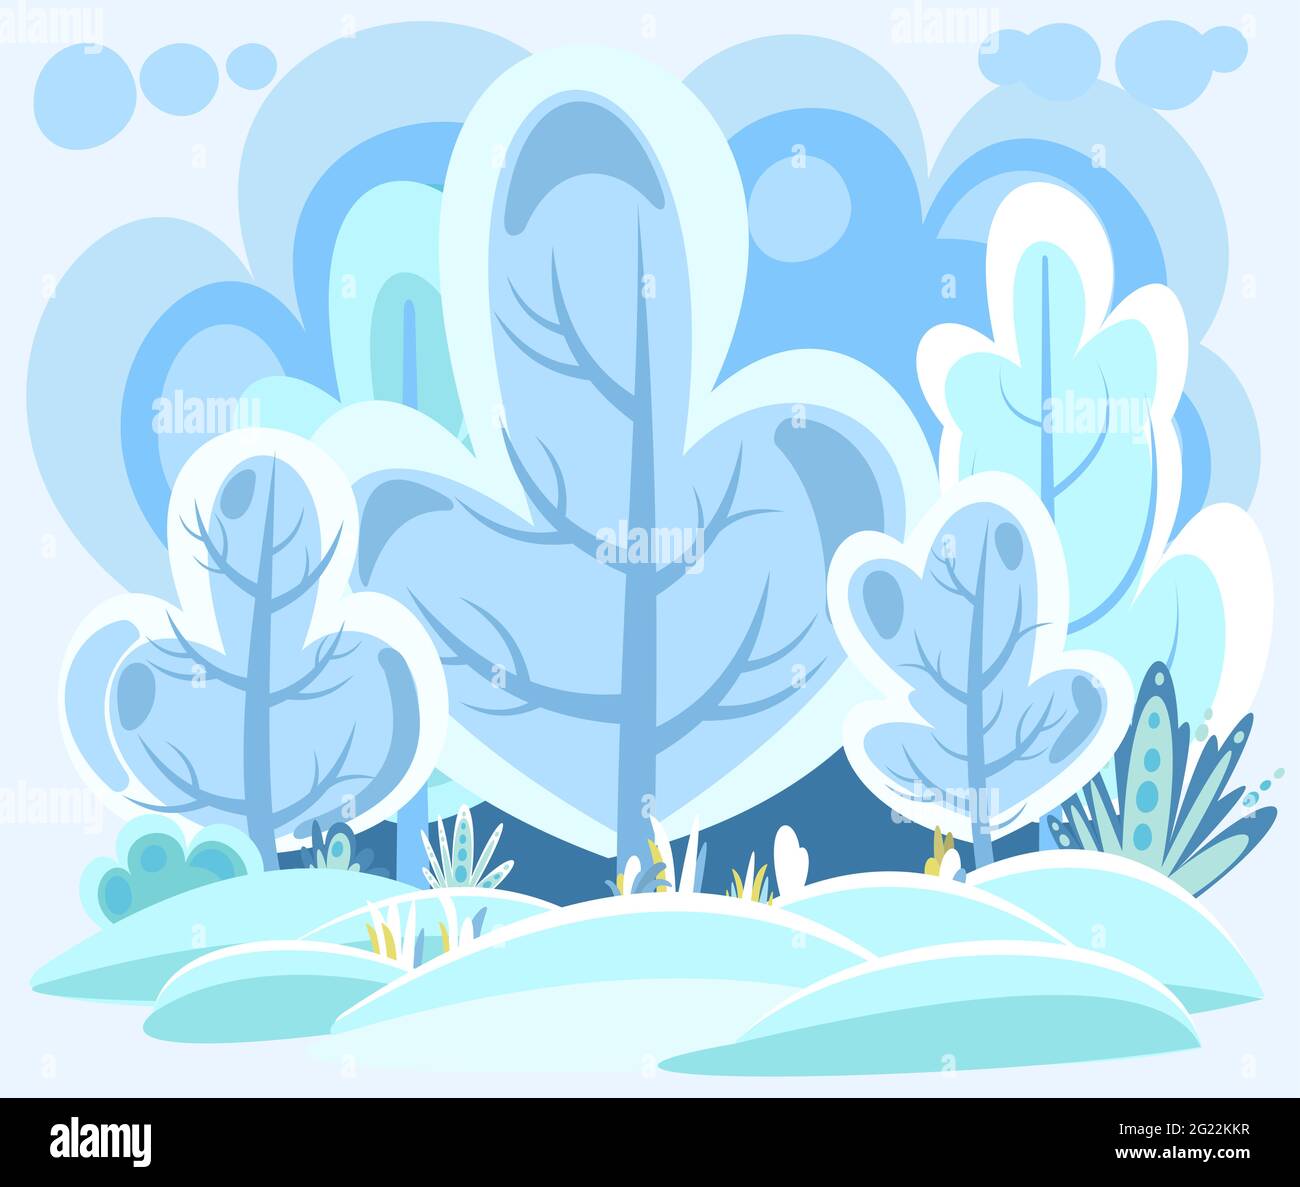 Flat winter forest. Beautiful frosty landscape with snow covered trees. Illustration in simple symbolic style. Funny scene. Comic cartoon design Stock Vector